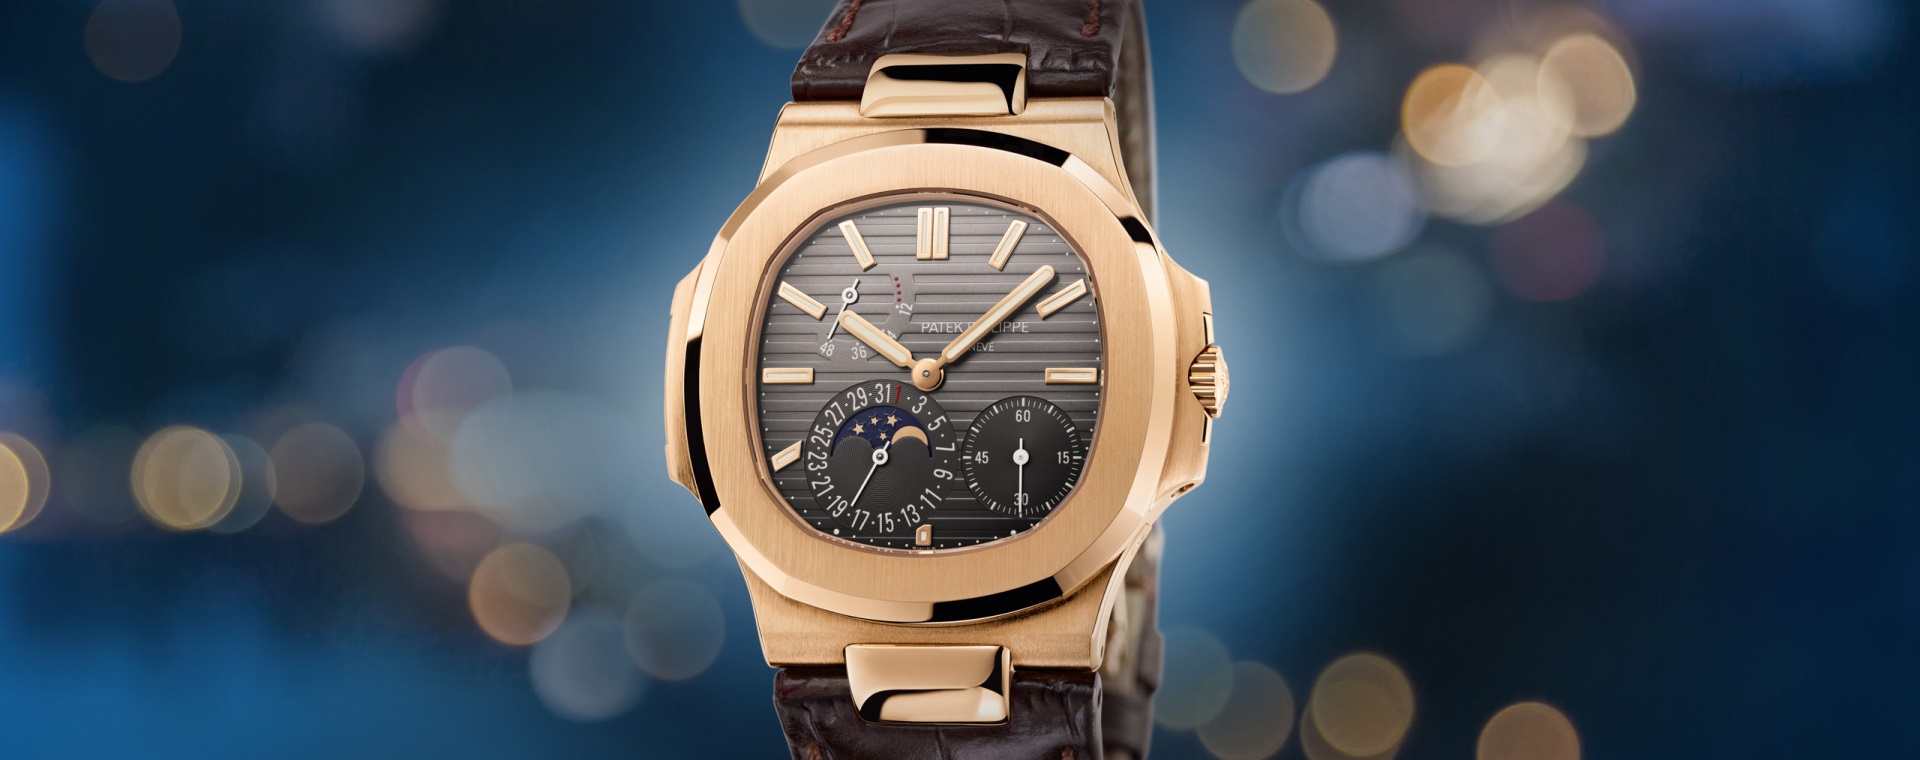 Patek Philippe World Time Minute Repeater 5531R-012